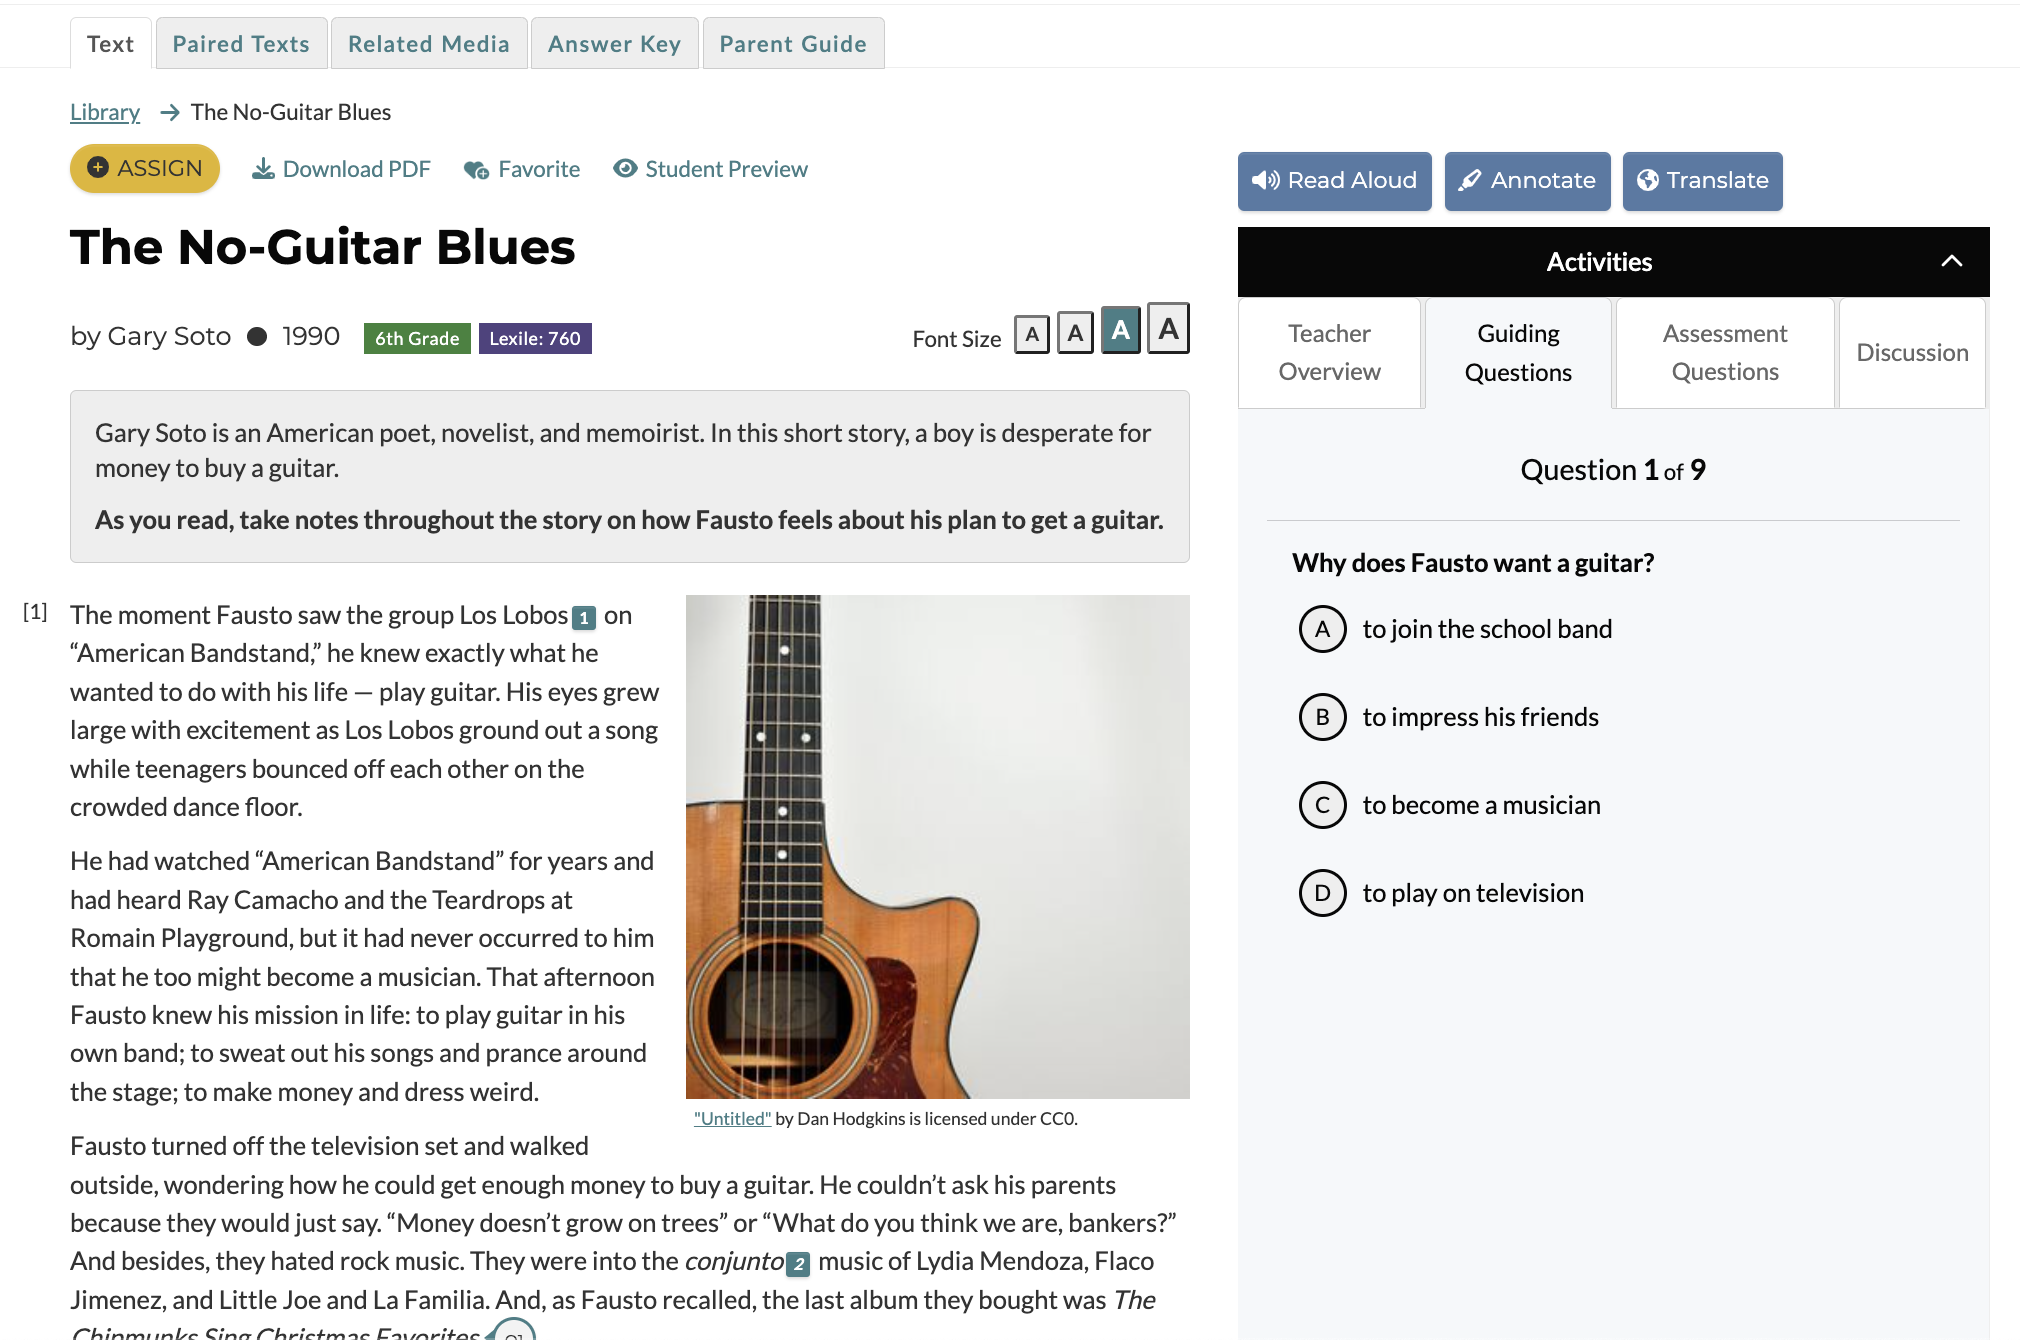 CommonLit Reading Lesson "The No-Guitar Blues" by Gary Soto. On the right side there is a guiding question for students to answer.